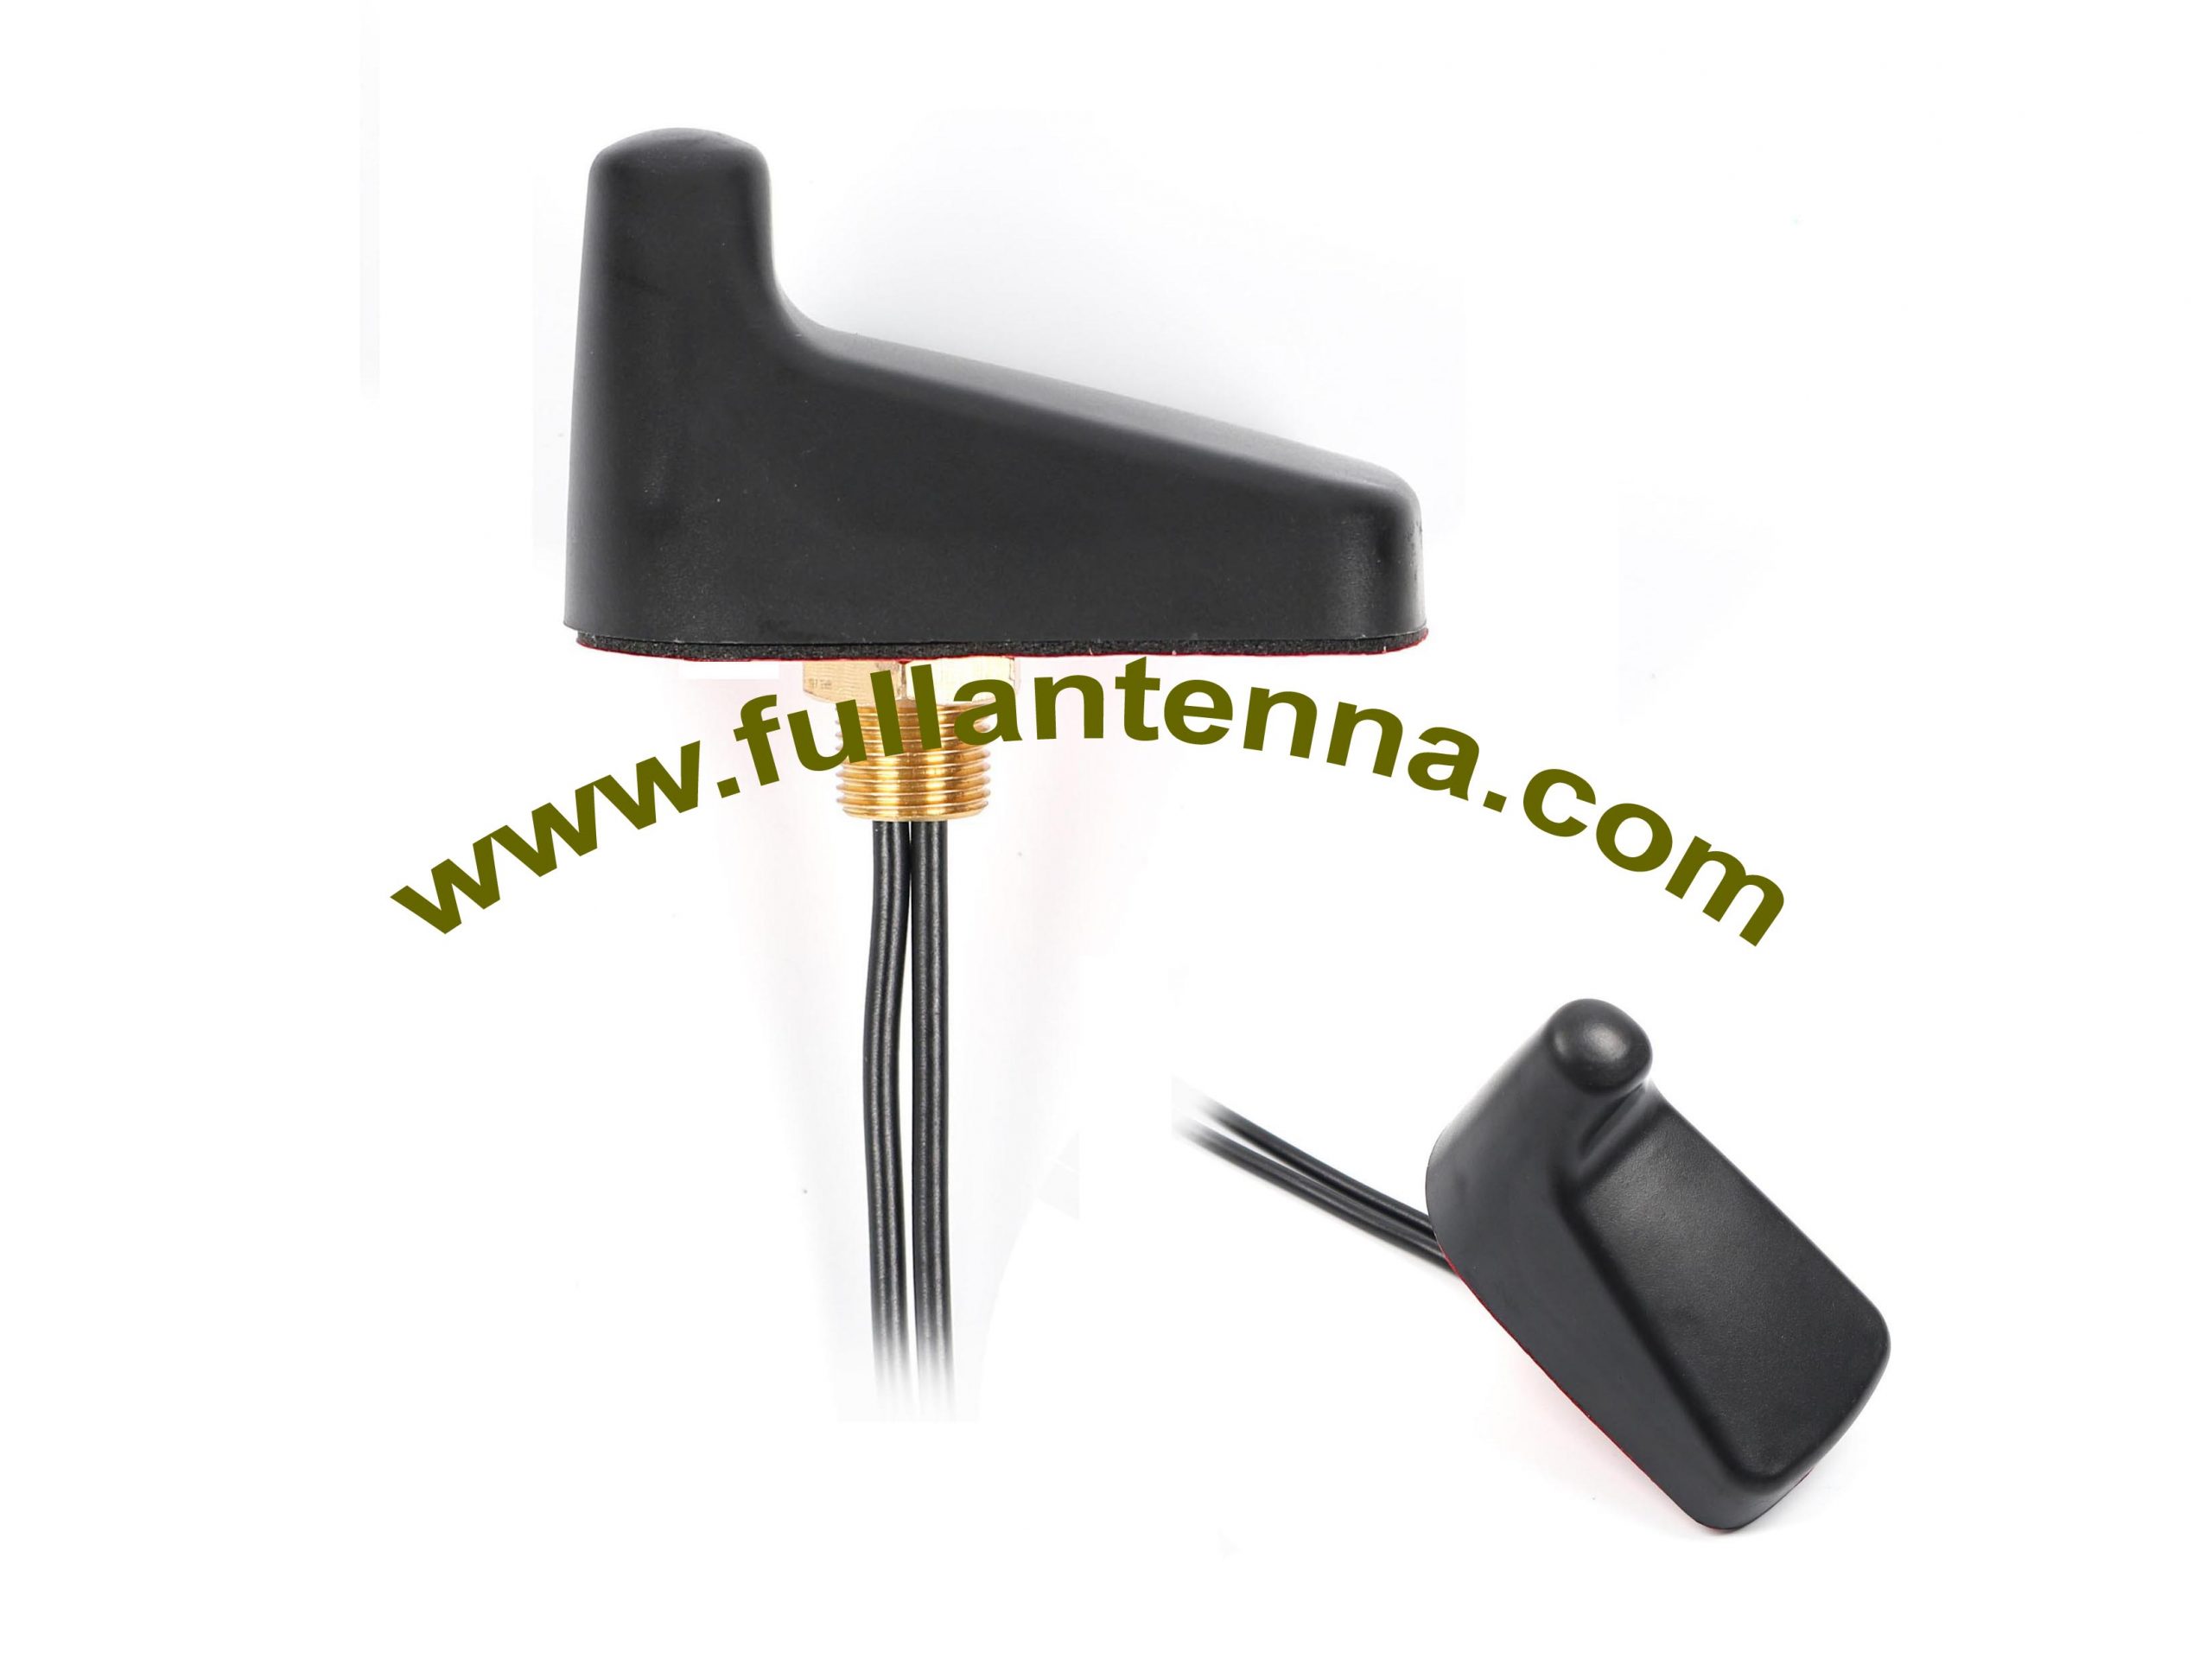 New Fashion Design for GPS combined Antenna – P/N:FAGPSWIFI.03,2 In 1 Combined Antenna, gps wifi antenna screw mount – Fullantenna